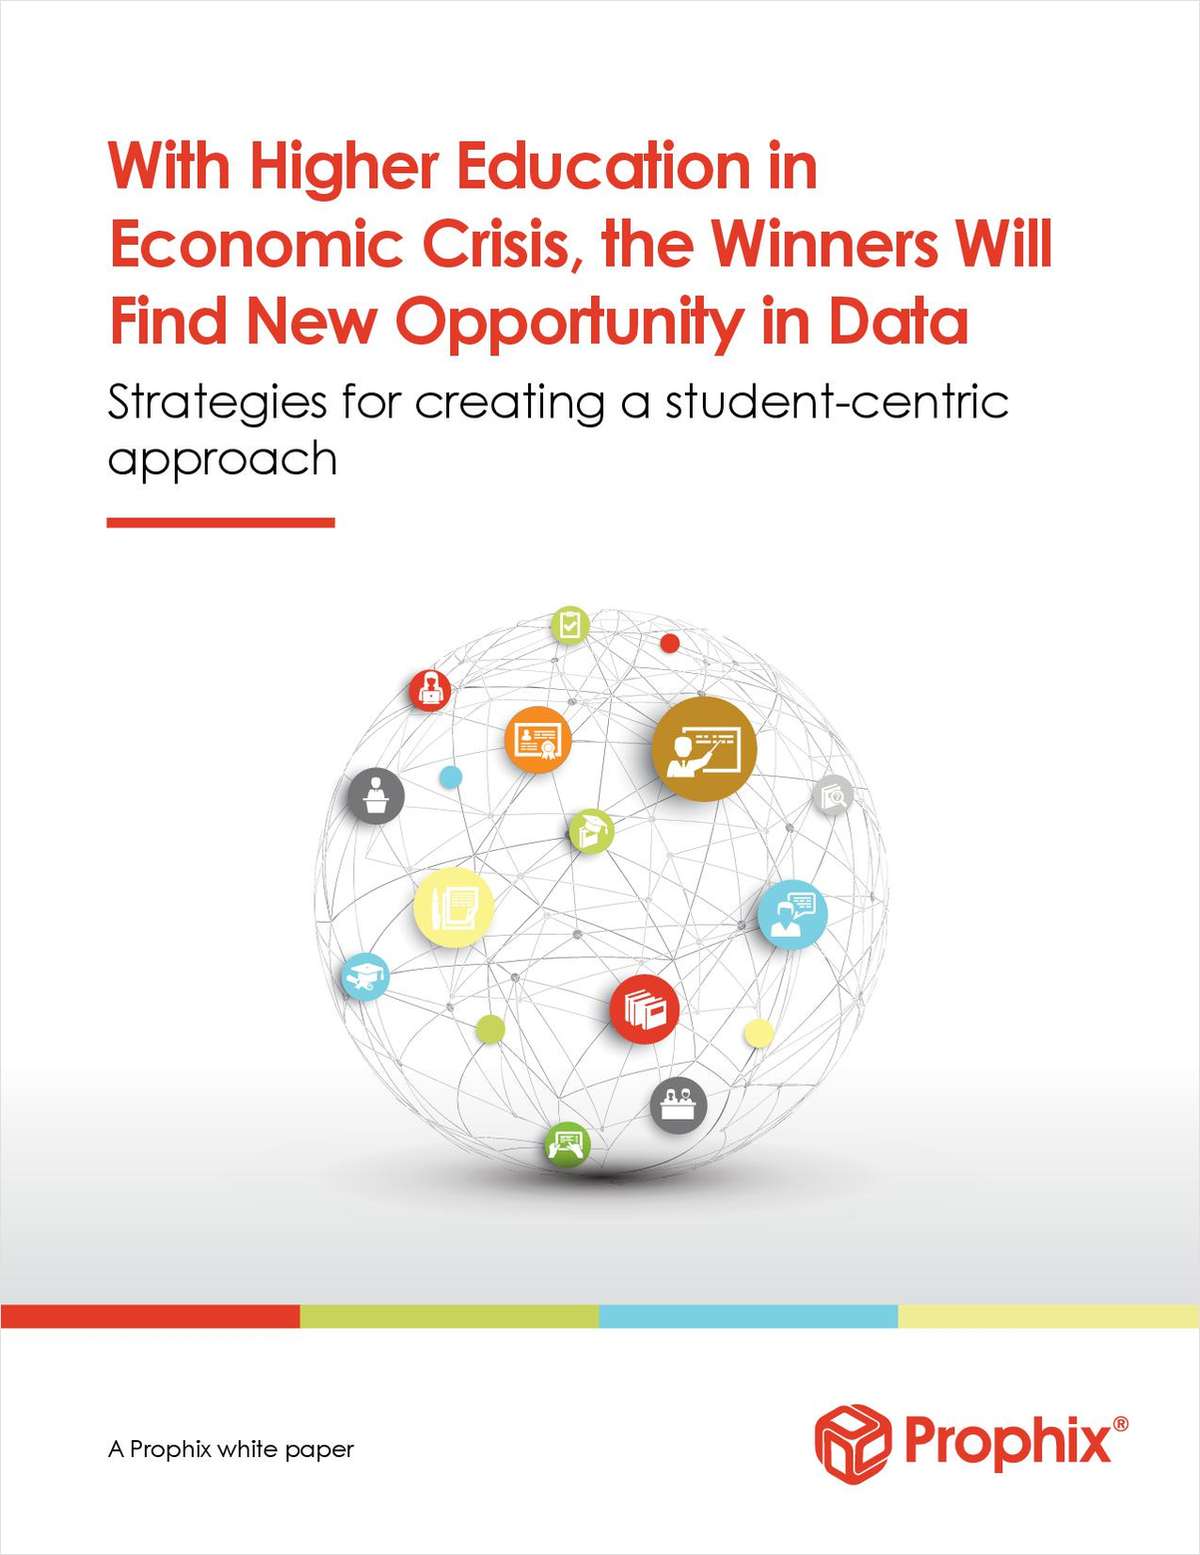 With Higher Education In Economic Crisis, The Winners Will Find Opportunity In Data